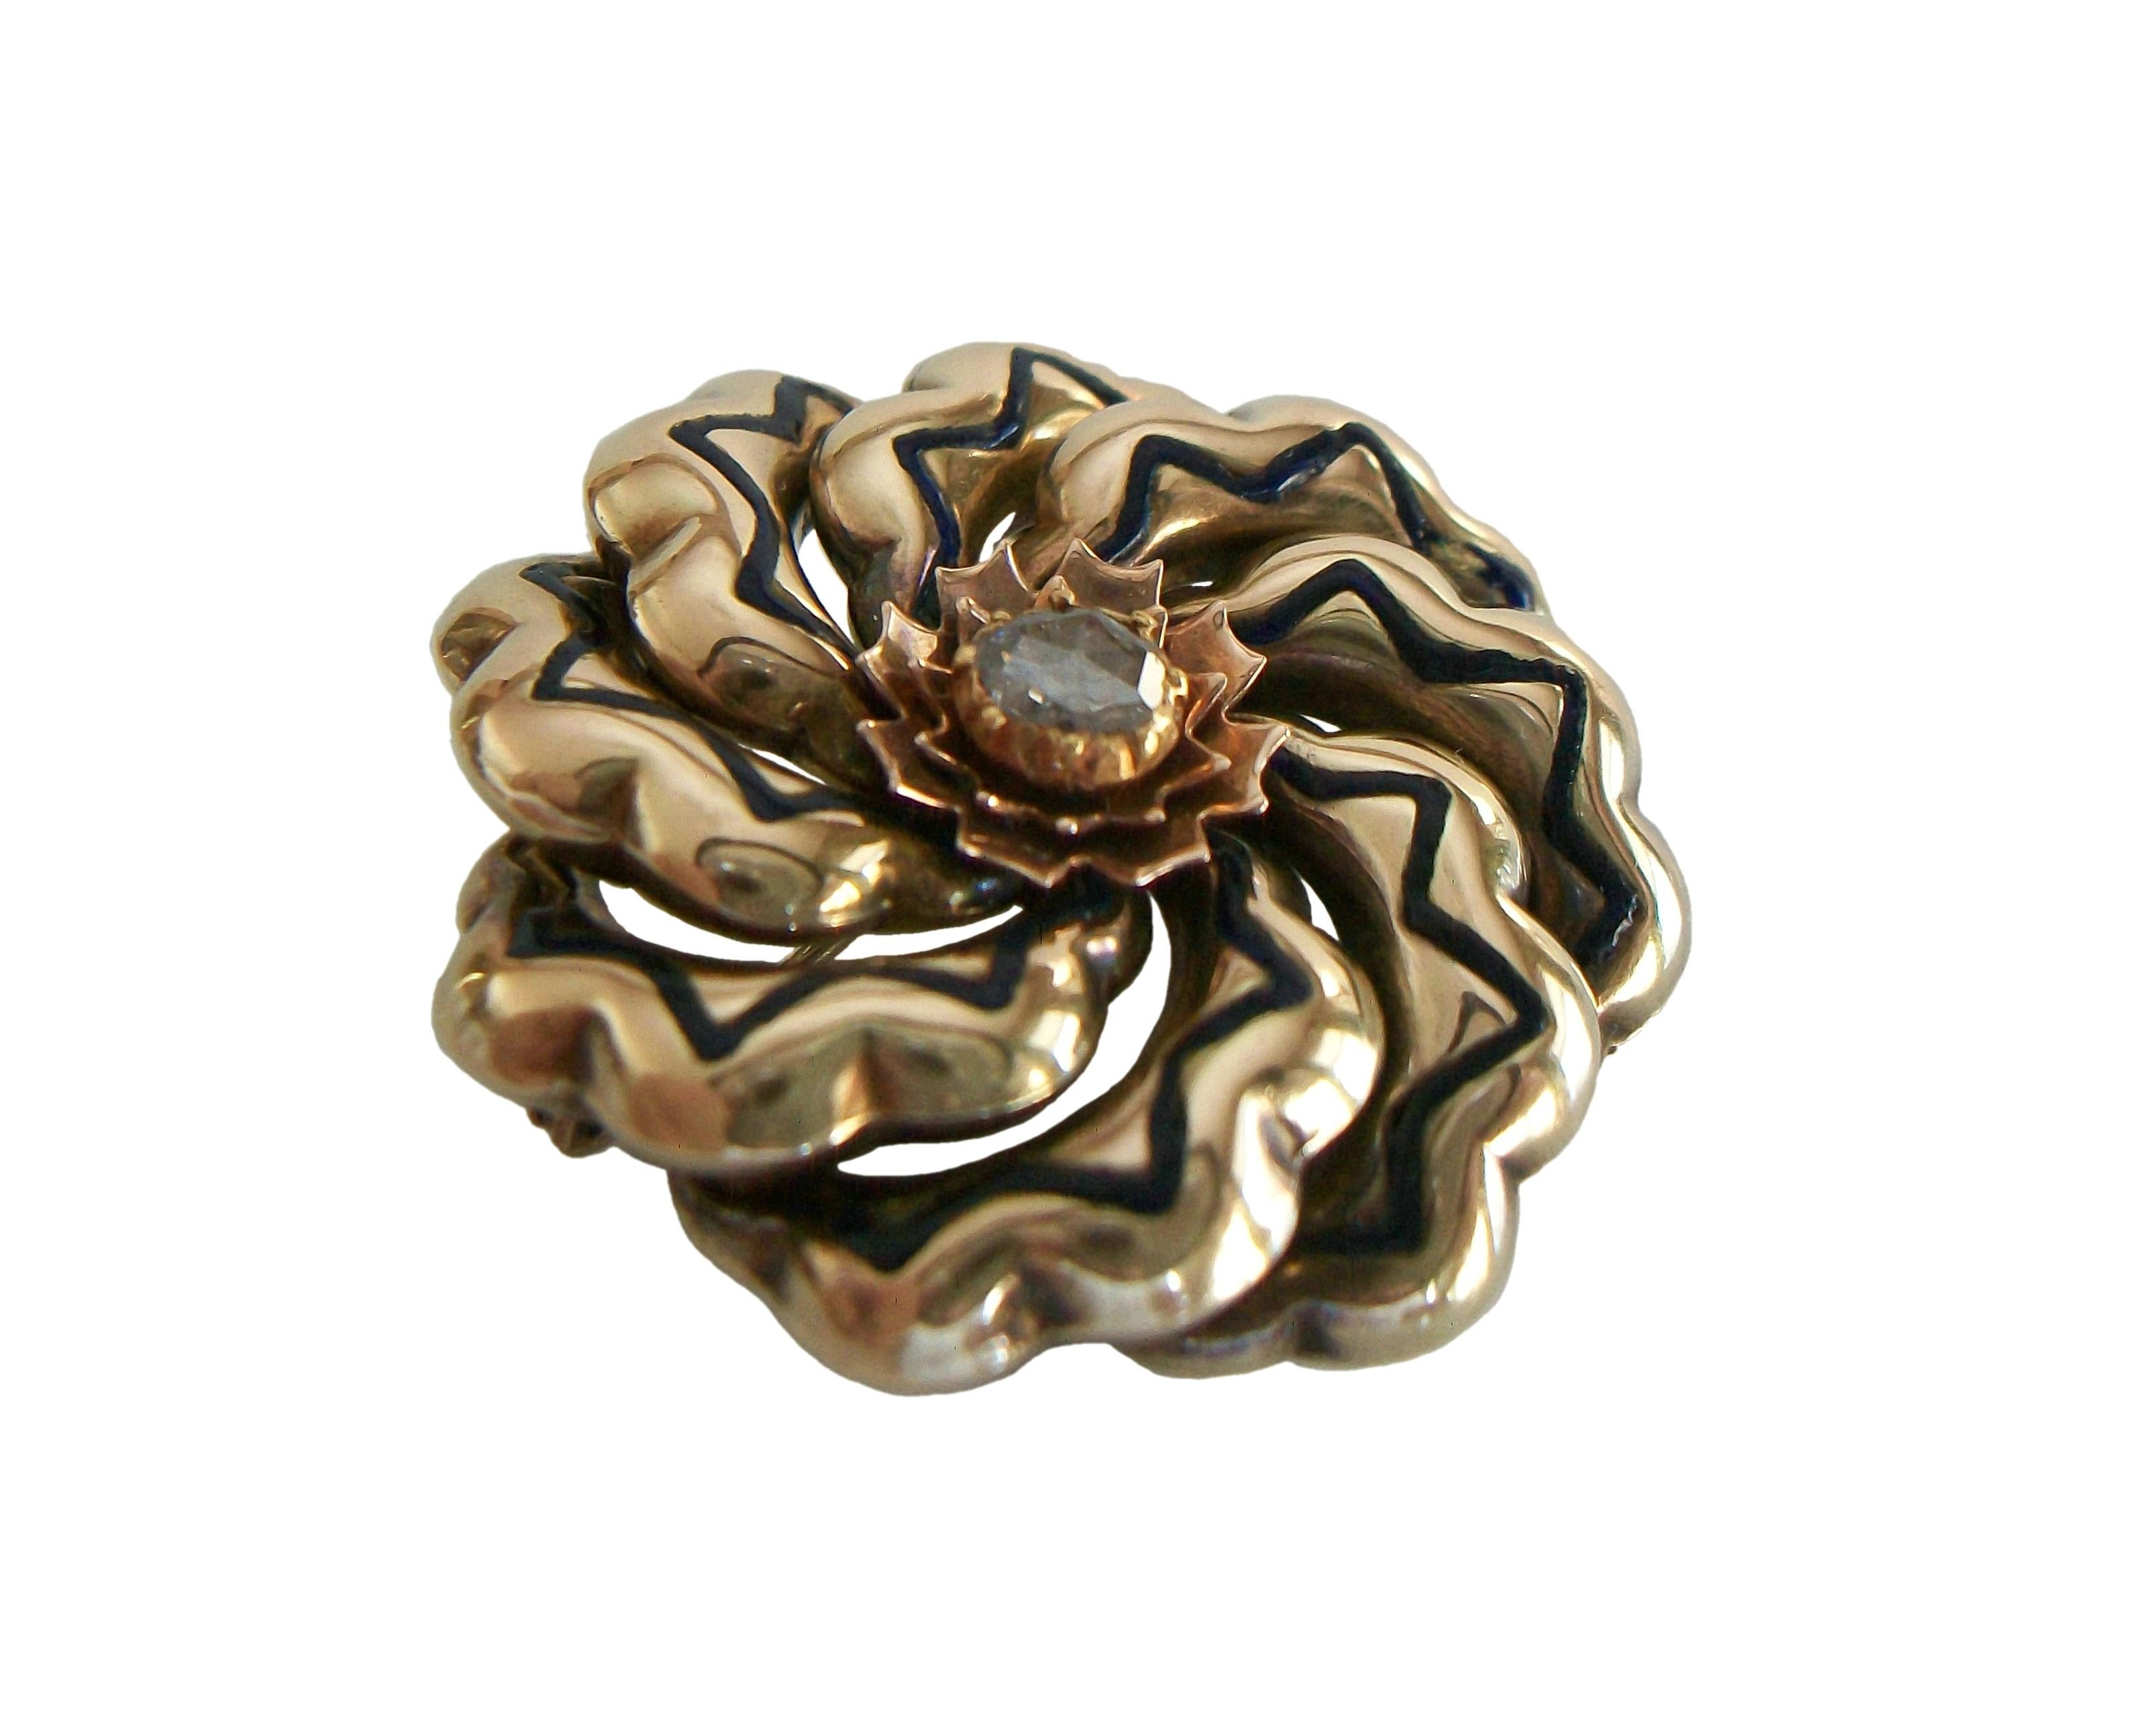 Victorian Gold & Enamel Flower Brooch with Center Rose Cut Diamond, Circa 1900 For Sale 3